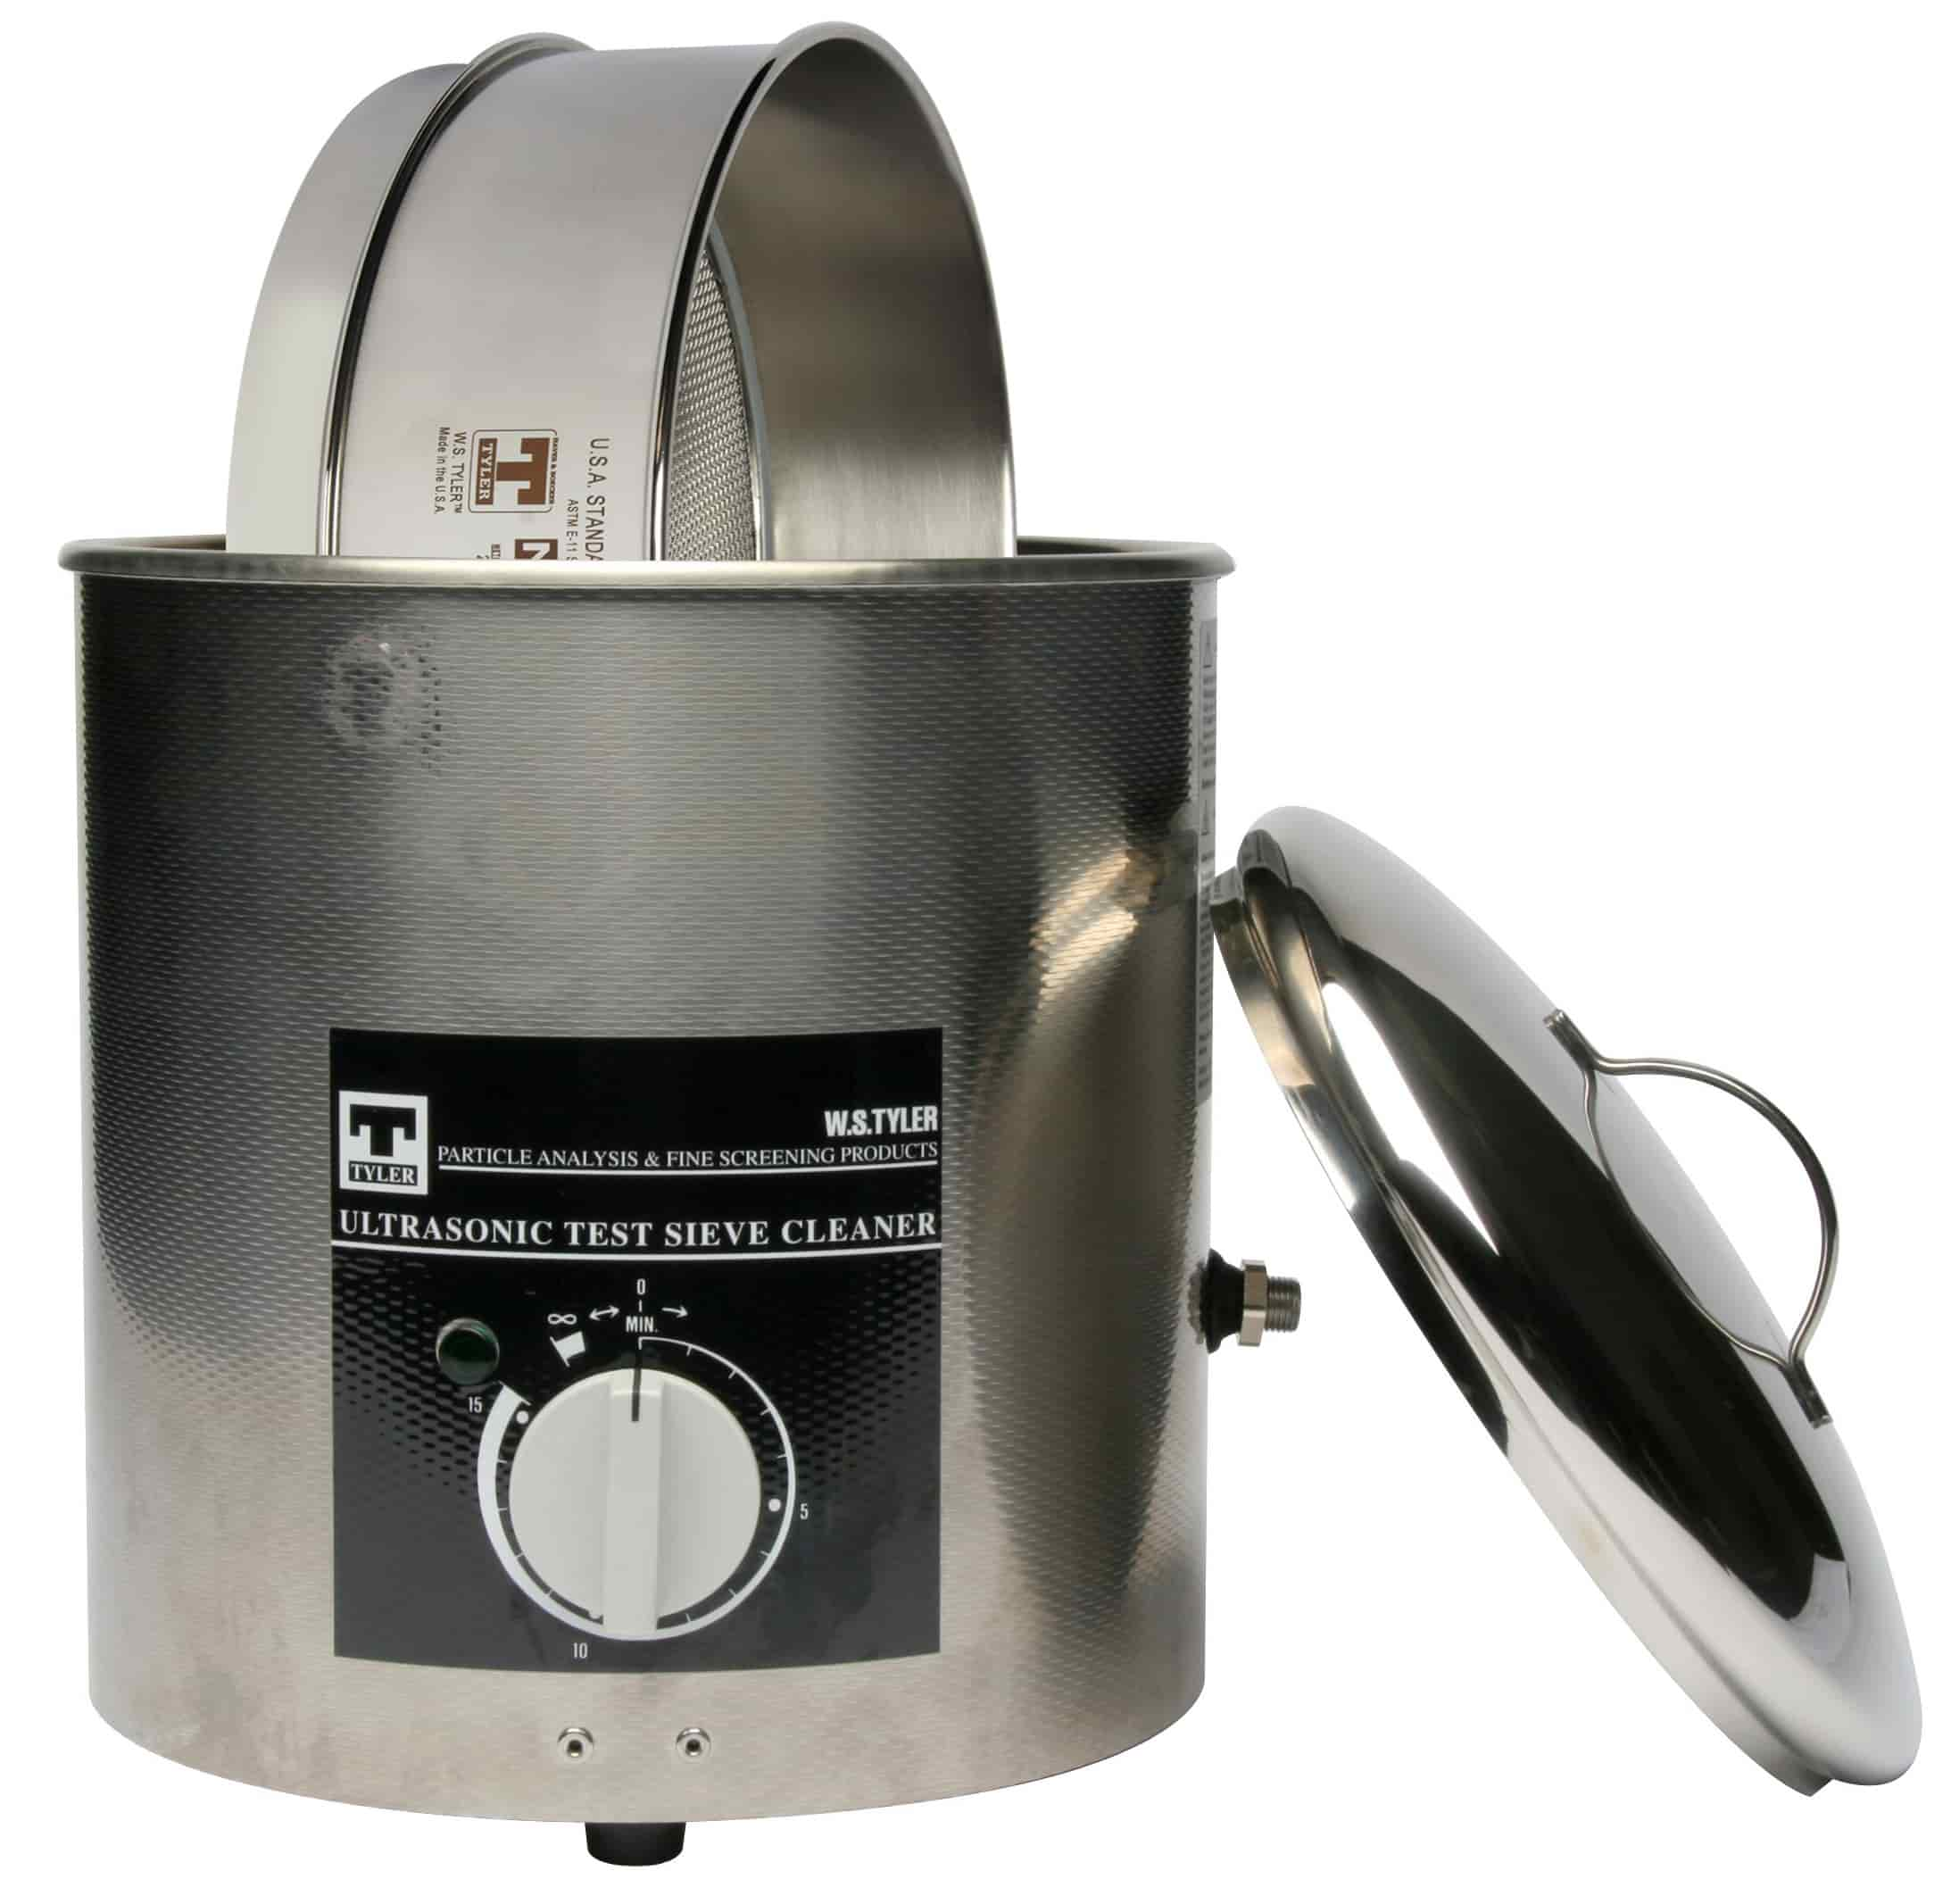 Sieve cleaning devices for maintenance